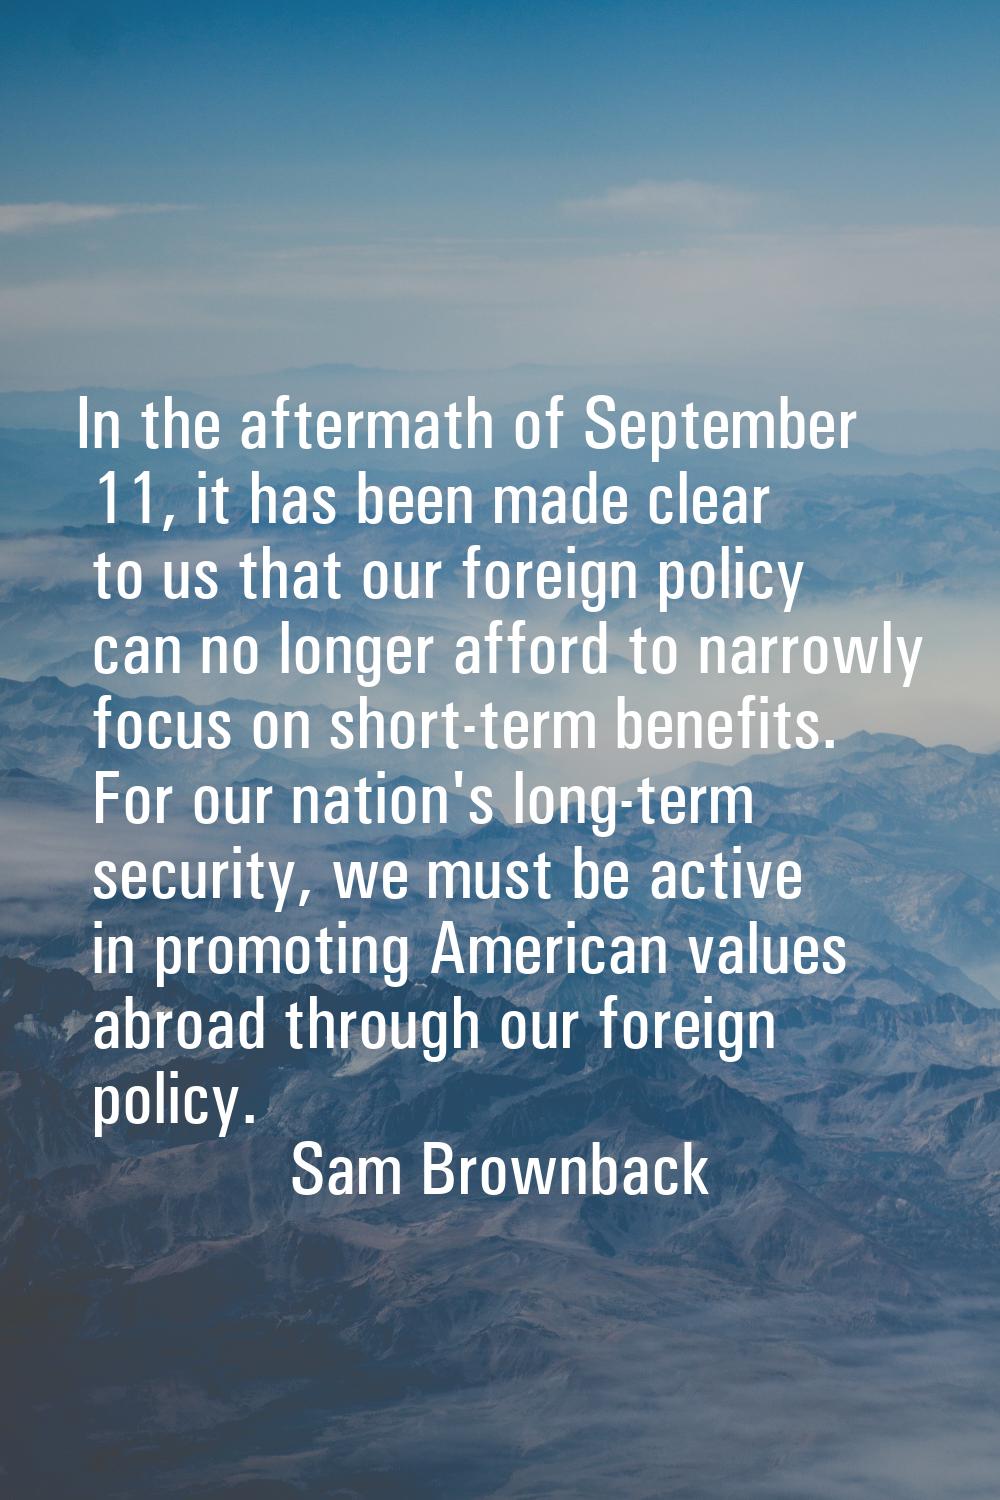 In the aftermath of September 11, it has been made clear to us that our foreign policy can no longe